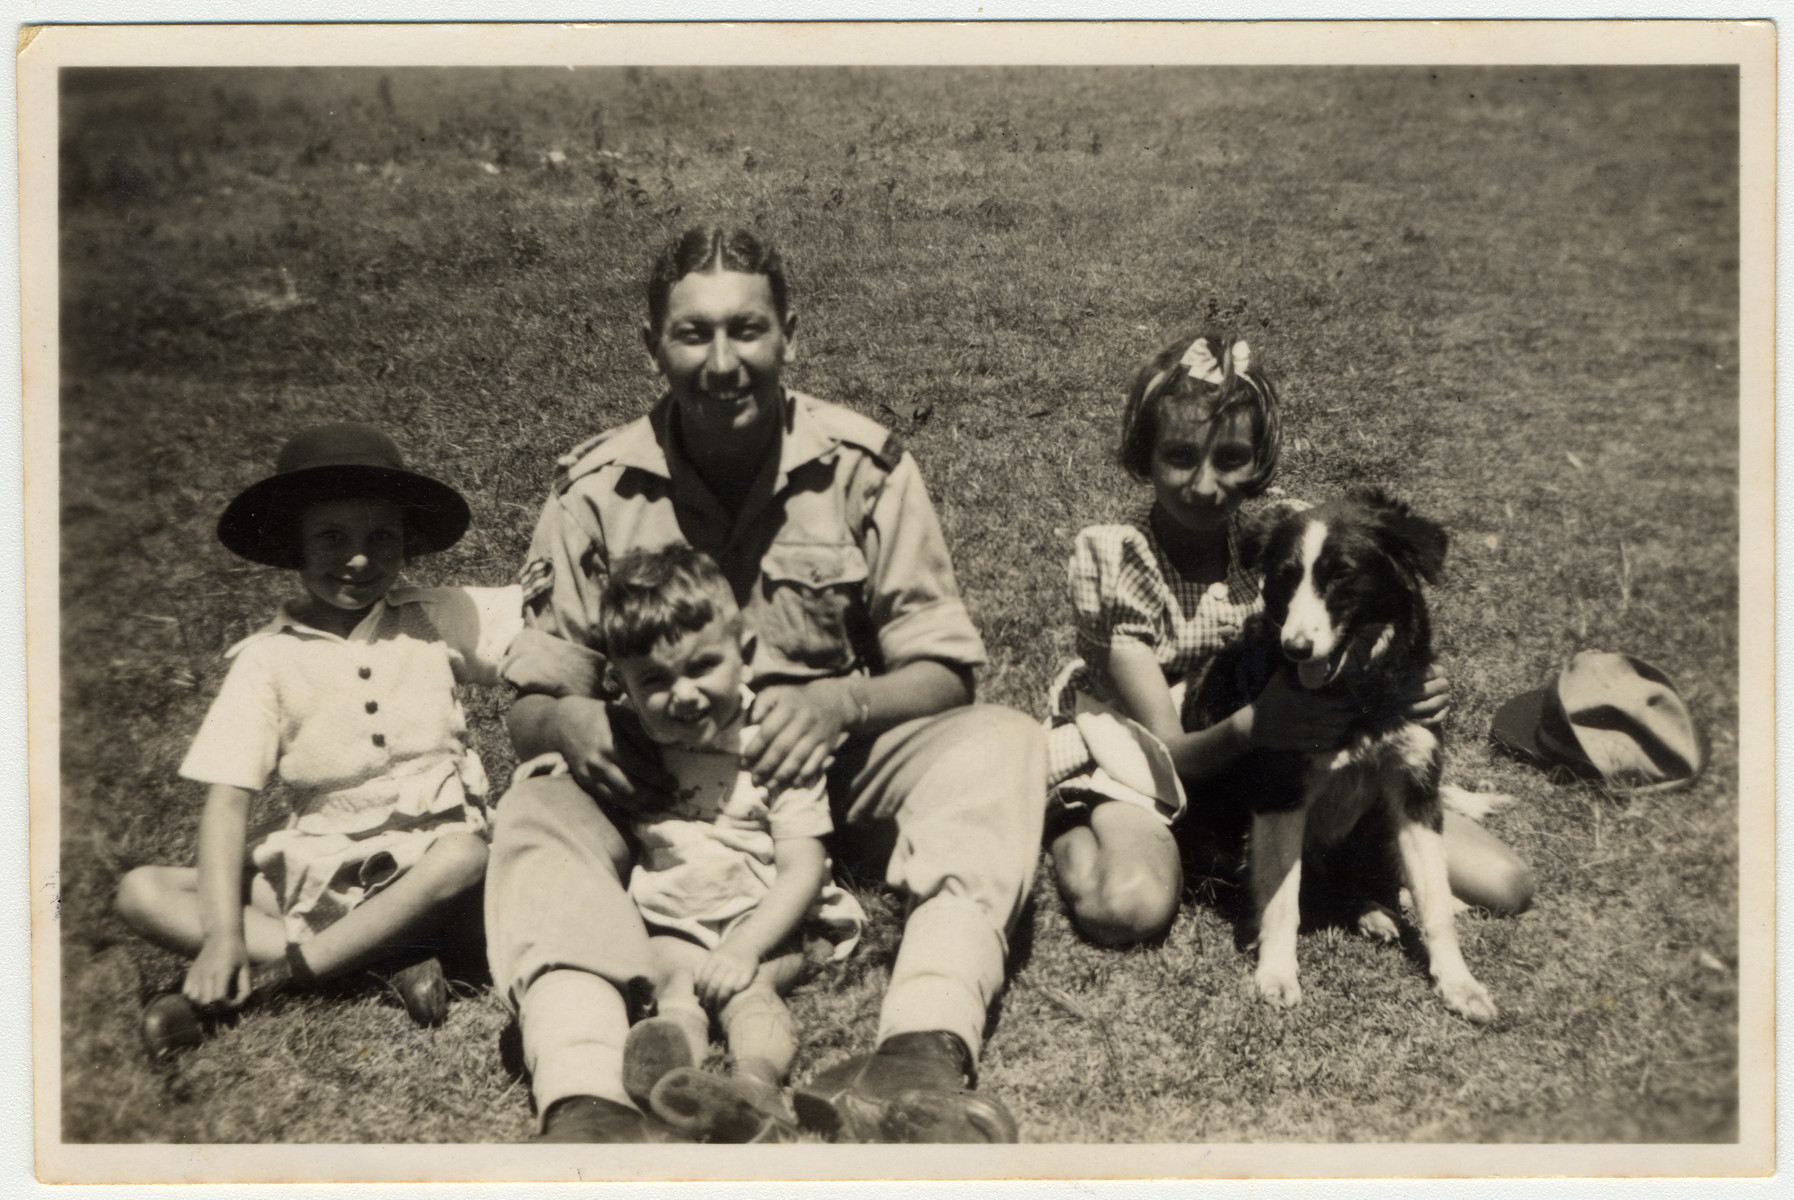 A Jewish soldier in the British army poses with refugee children from Germany on their farm in Kenya where he had come to celebrate Jewish holidays.

Gisela Berg is on the far left and her sister Inge is on the right.  In the center is a Jewish British soldier and Egon Berg.